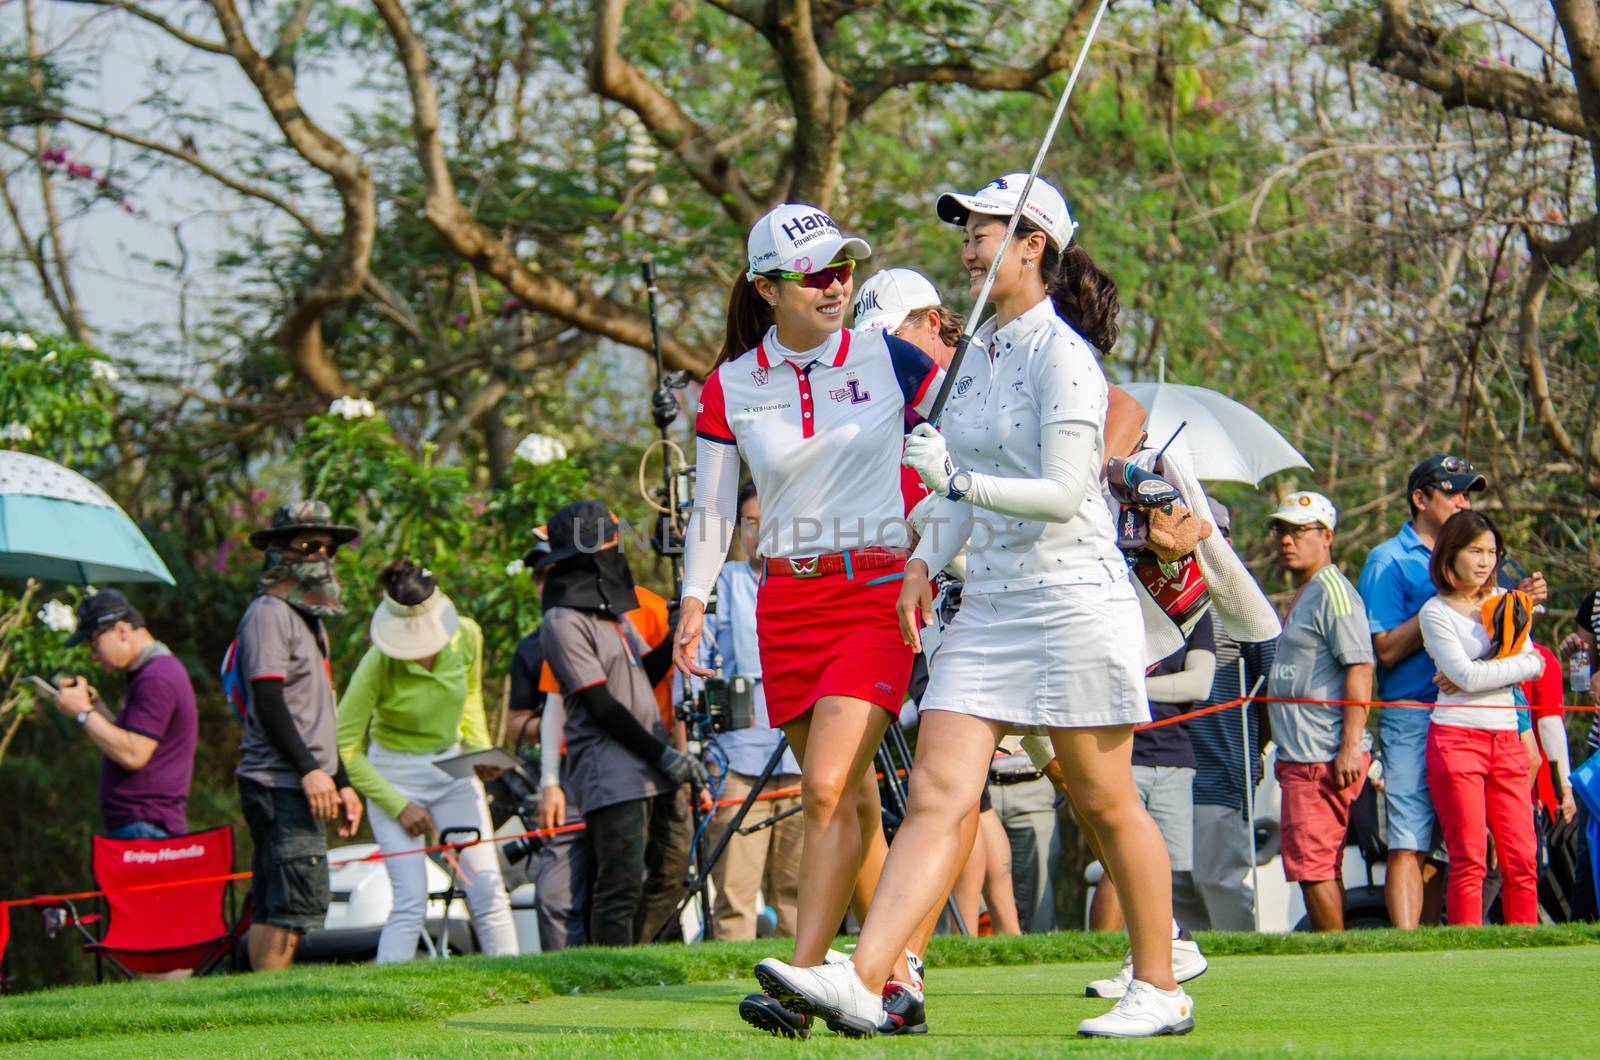 CHONBURI - FEBRUARY 28 : Hee Young Park and Xi Yu Lin in Honda LPGA Thailand 2016 at Siam Country Club, Pattaya Old Course on February 28, 2016 in Chonburi, Thailand.